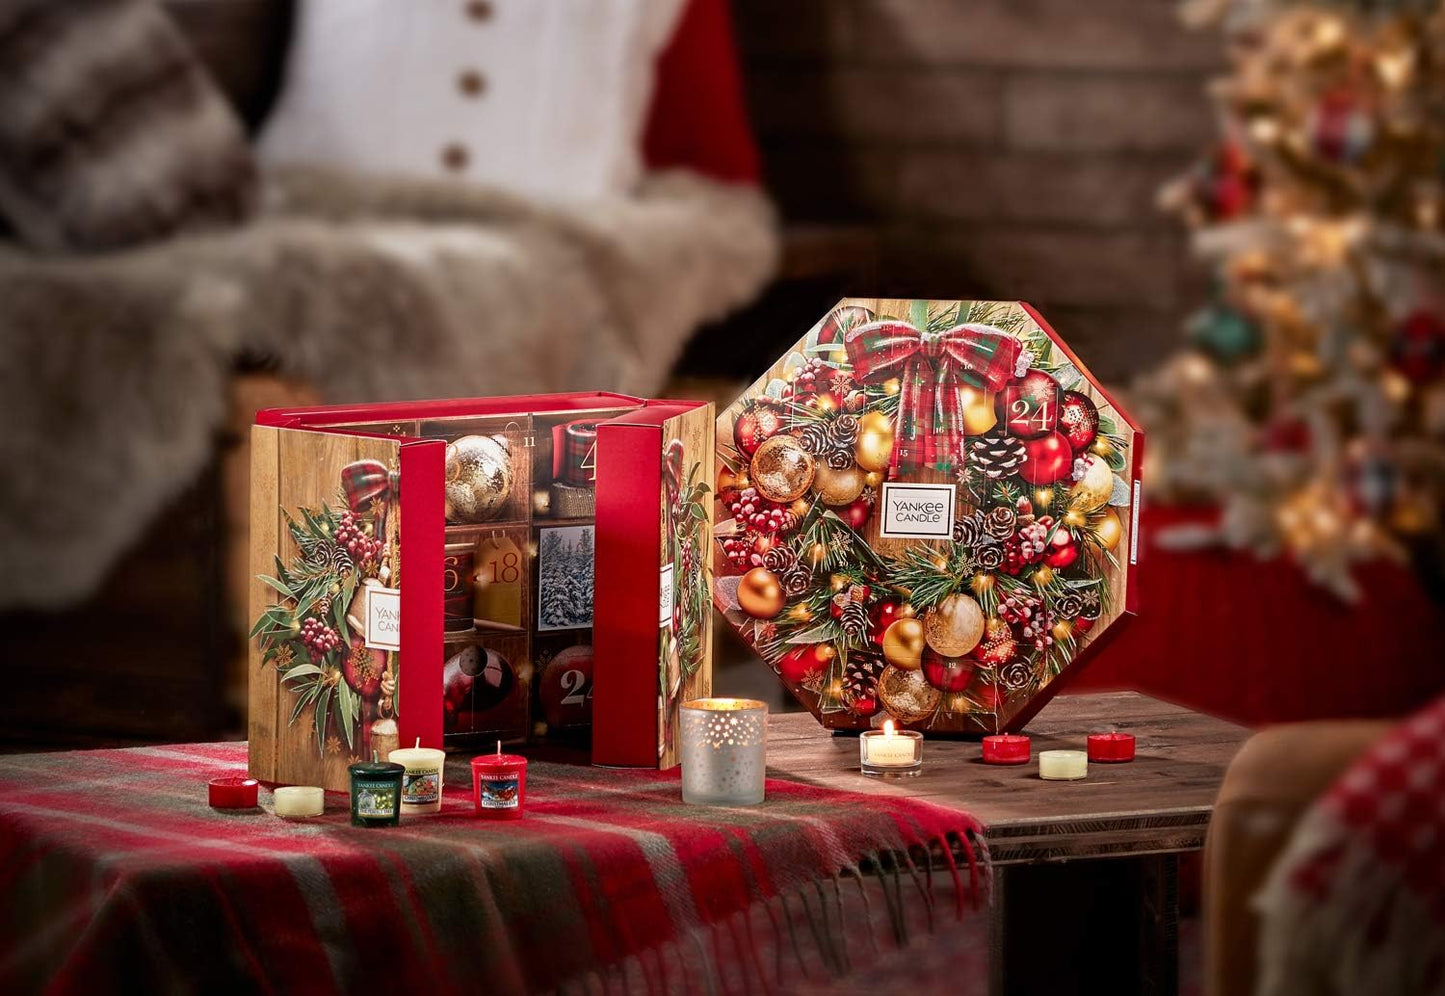 Yankee Candle Advent Calendar Gift Set with Tea Lights